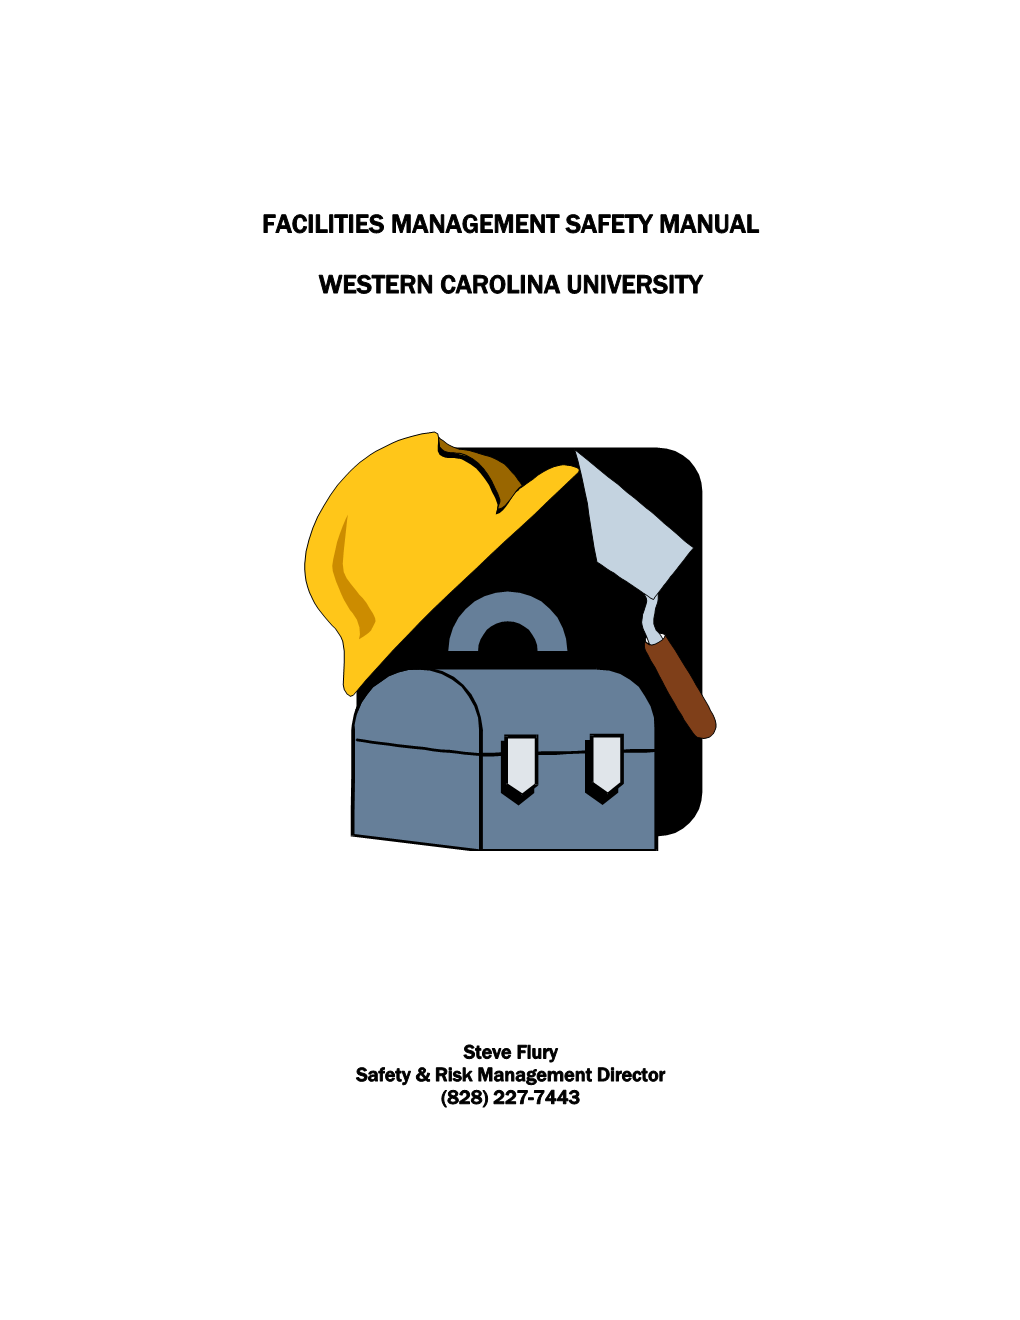 Physical Plant Safety Manual